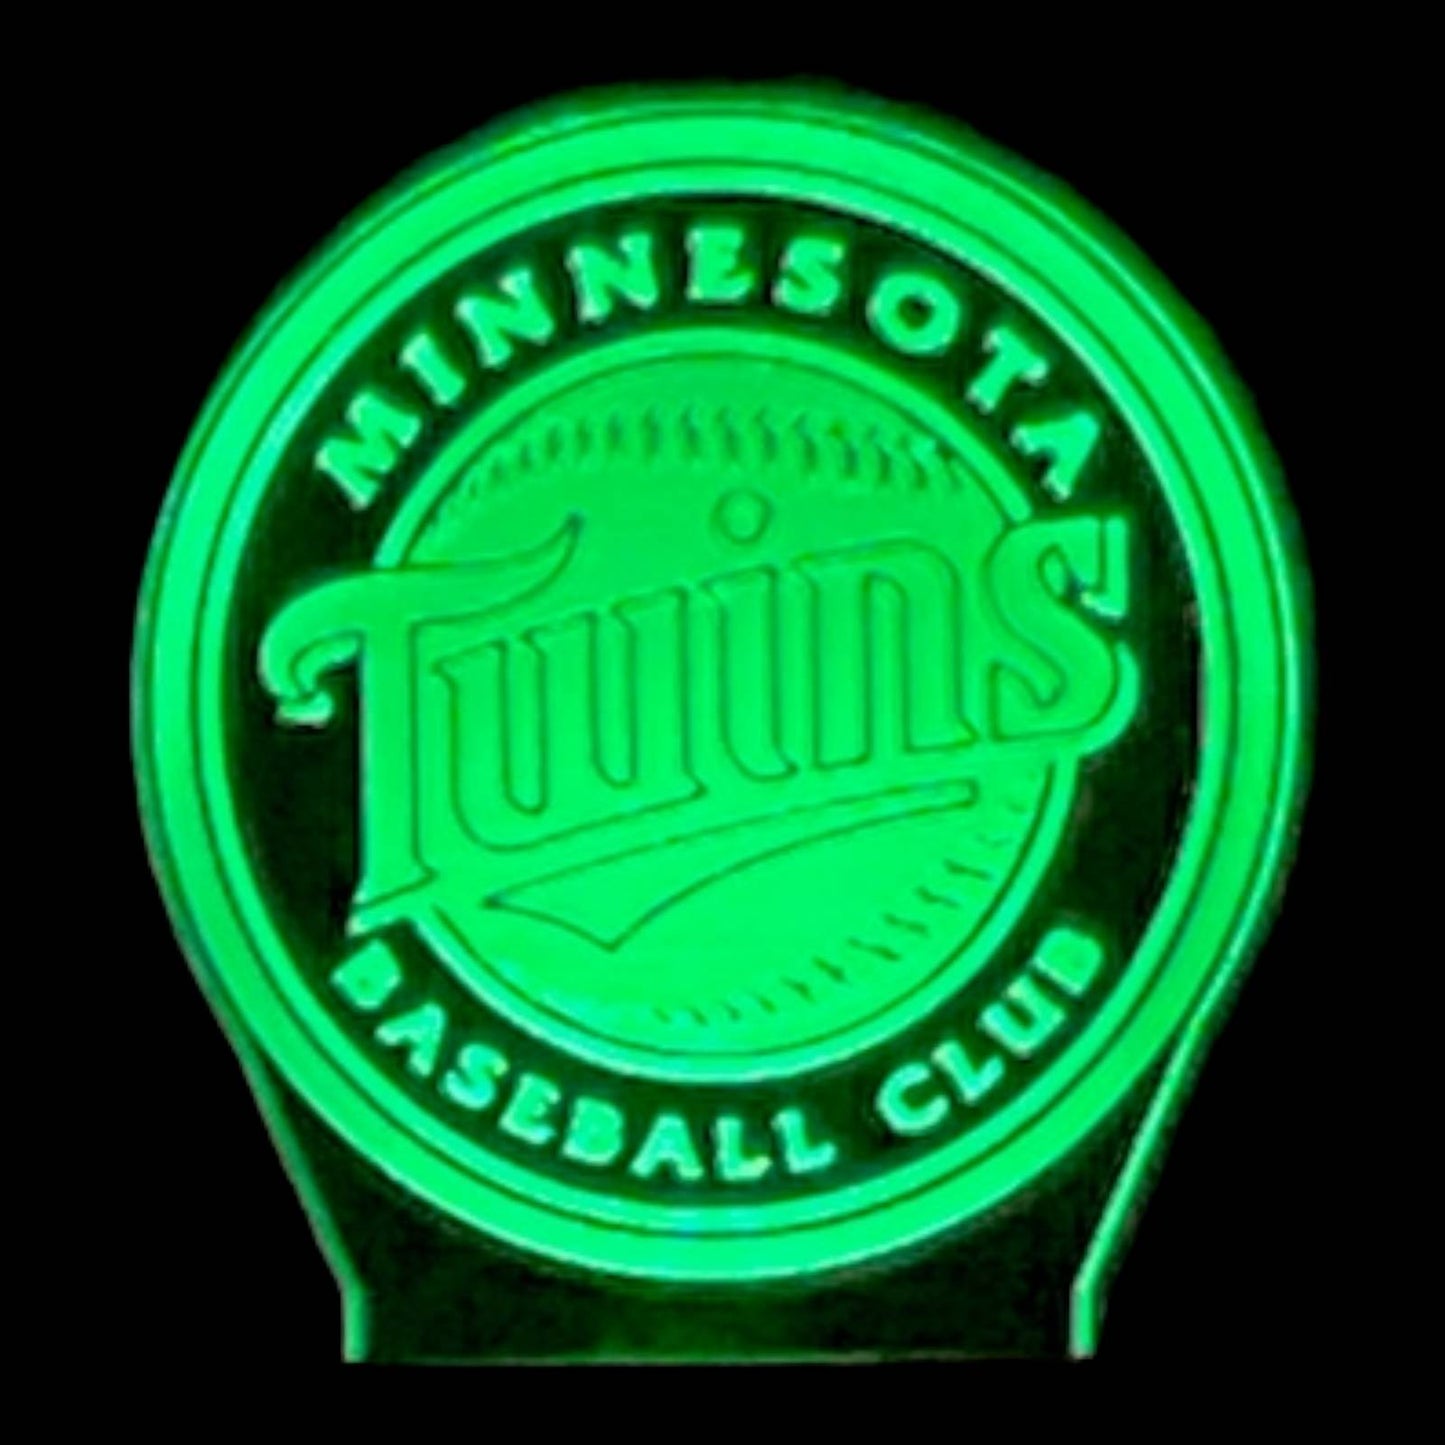 Minnesota Twins 3D LED Night-Light 7 Color Changing Lamp w/ Touch Switch